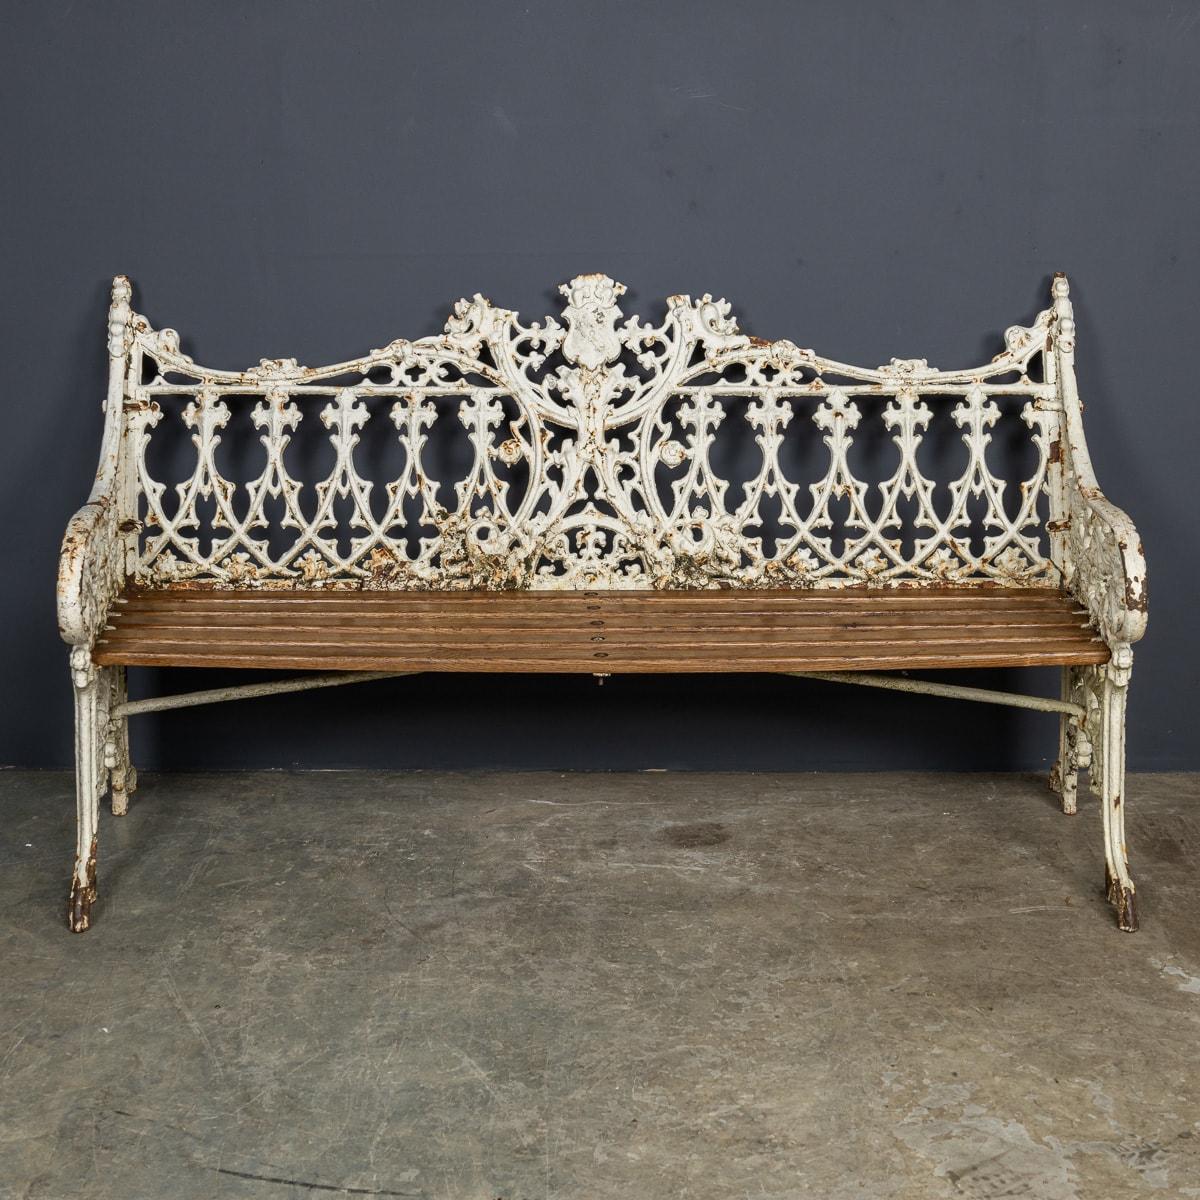 Antique 19th Century Victorian park bench, crafted with cast iron and wood. It features elegantly scrolled arms and legs painted in a white finish. The bench is structurally sound and perfect for any outdoor setting.

We offer complimentary shipping